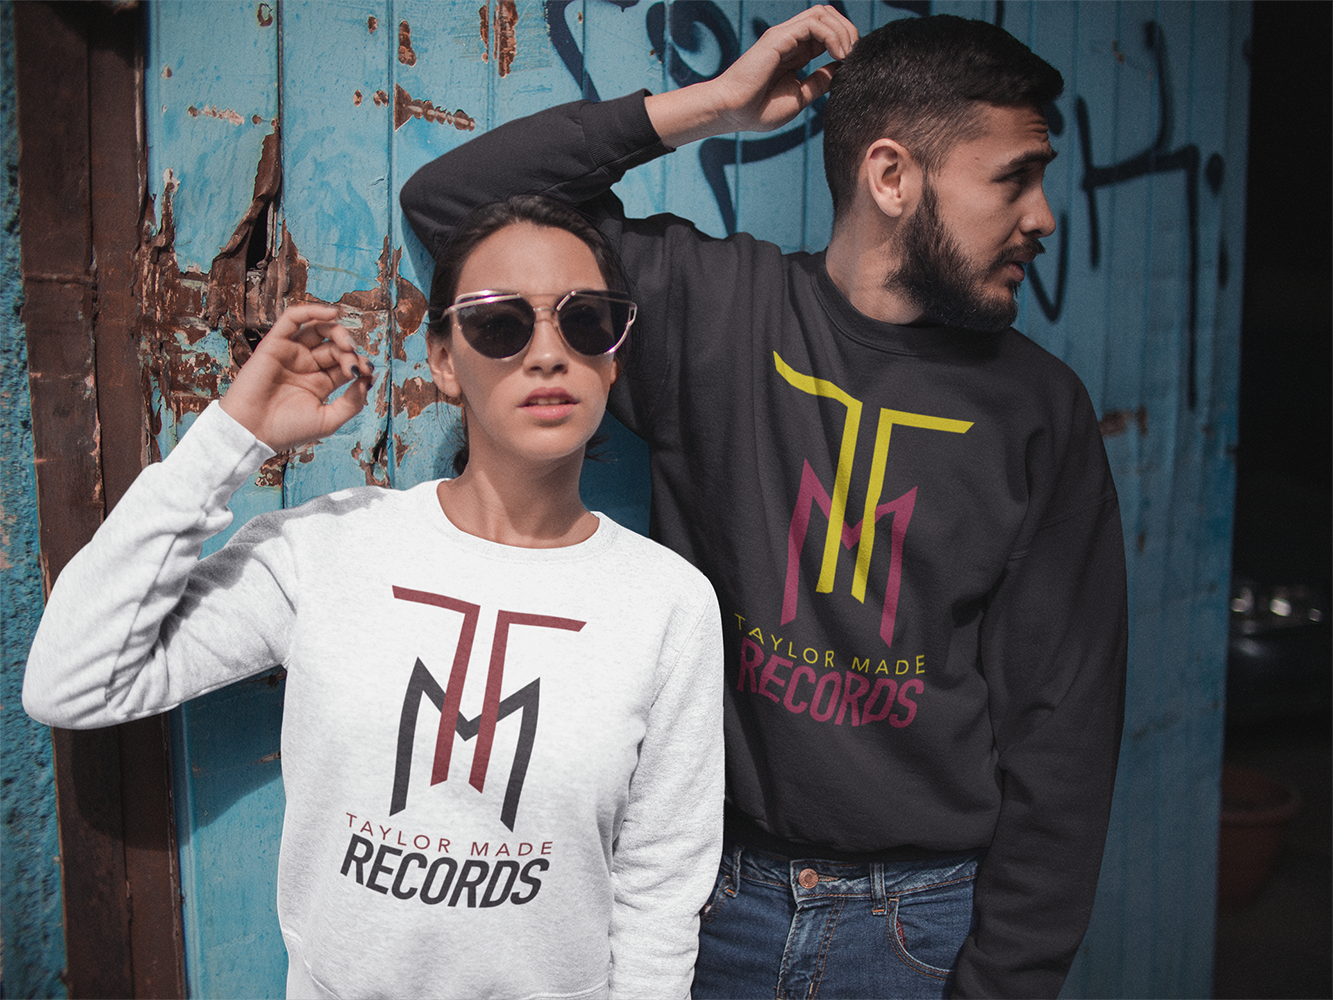 hispanic-couple-wearing-different-crewneck-sweatshirts-mockup-while-standing-against-an-old-door-a15532.png